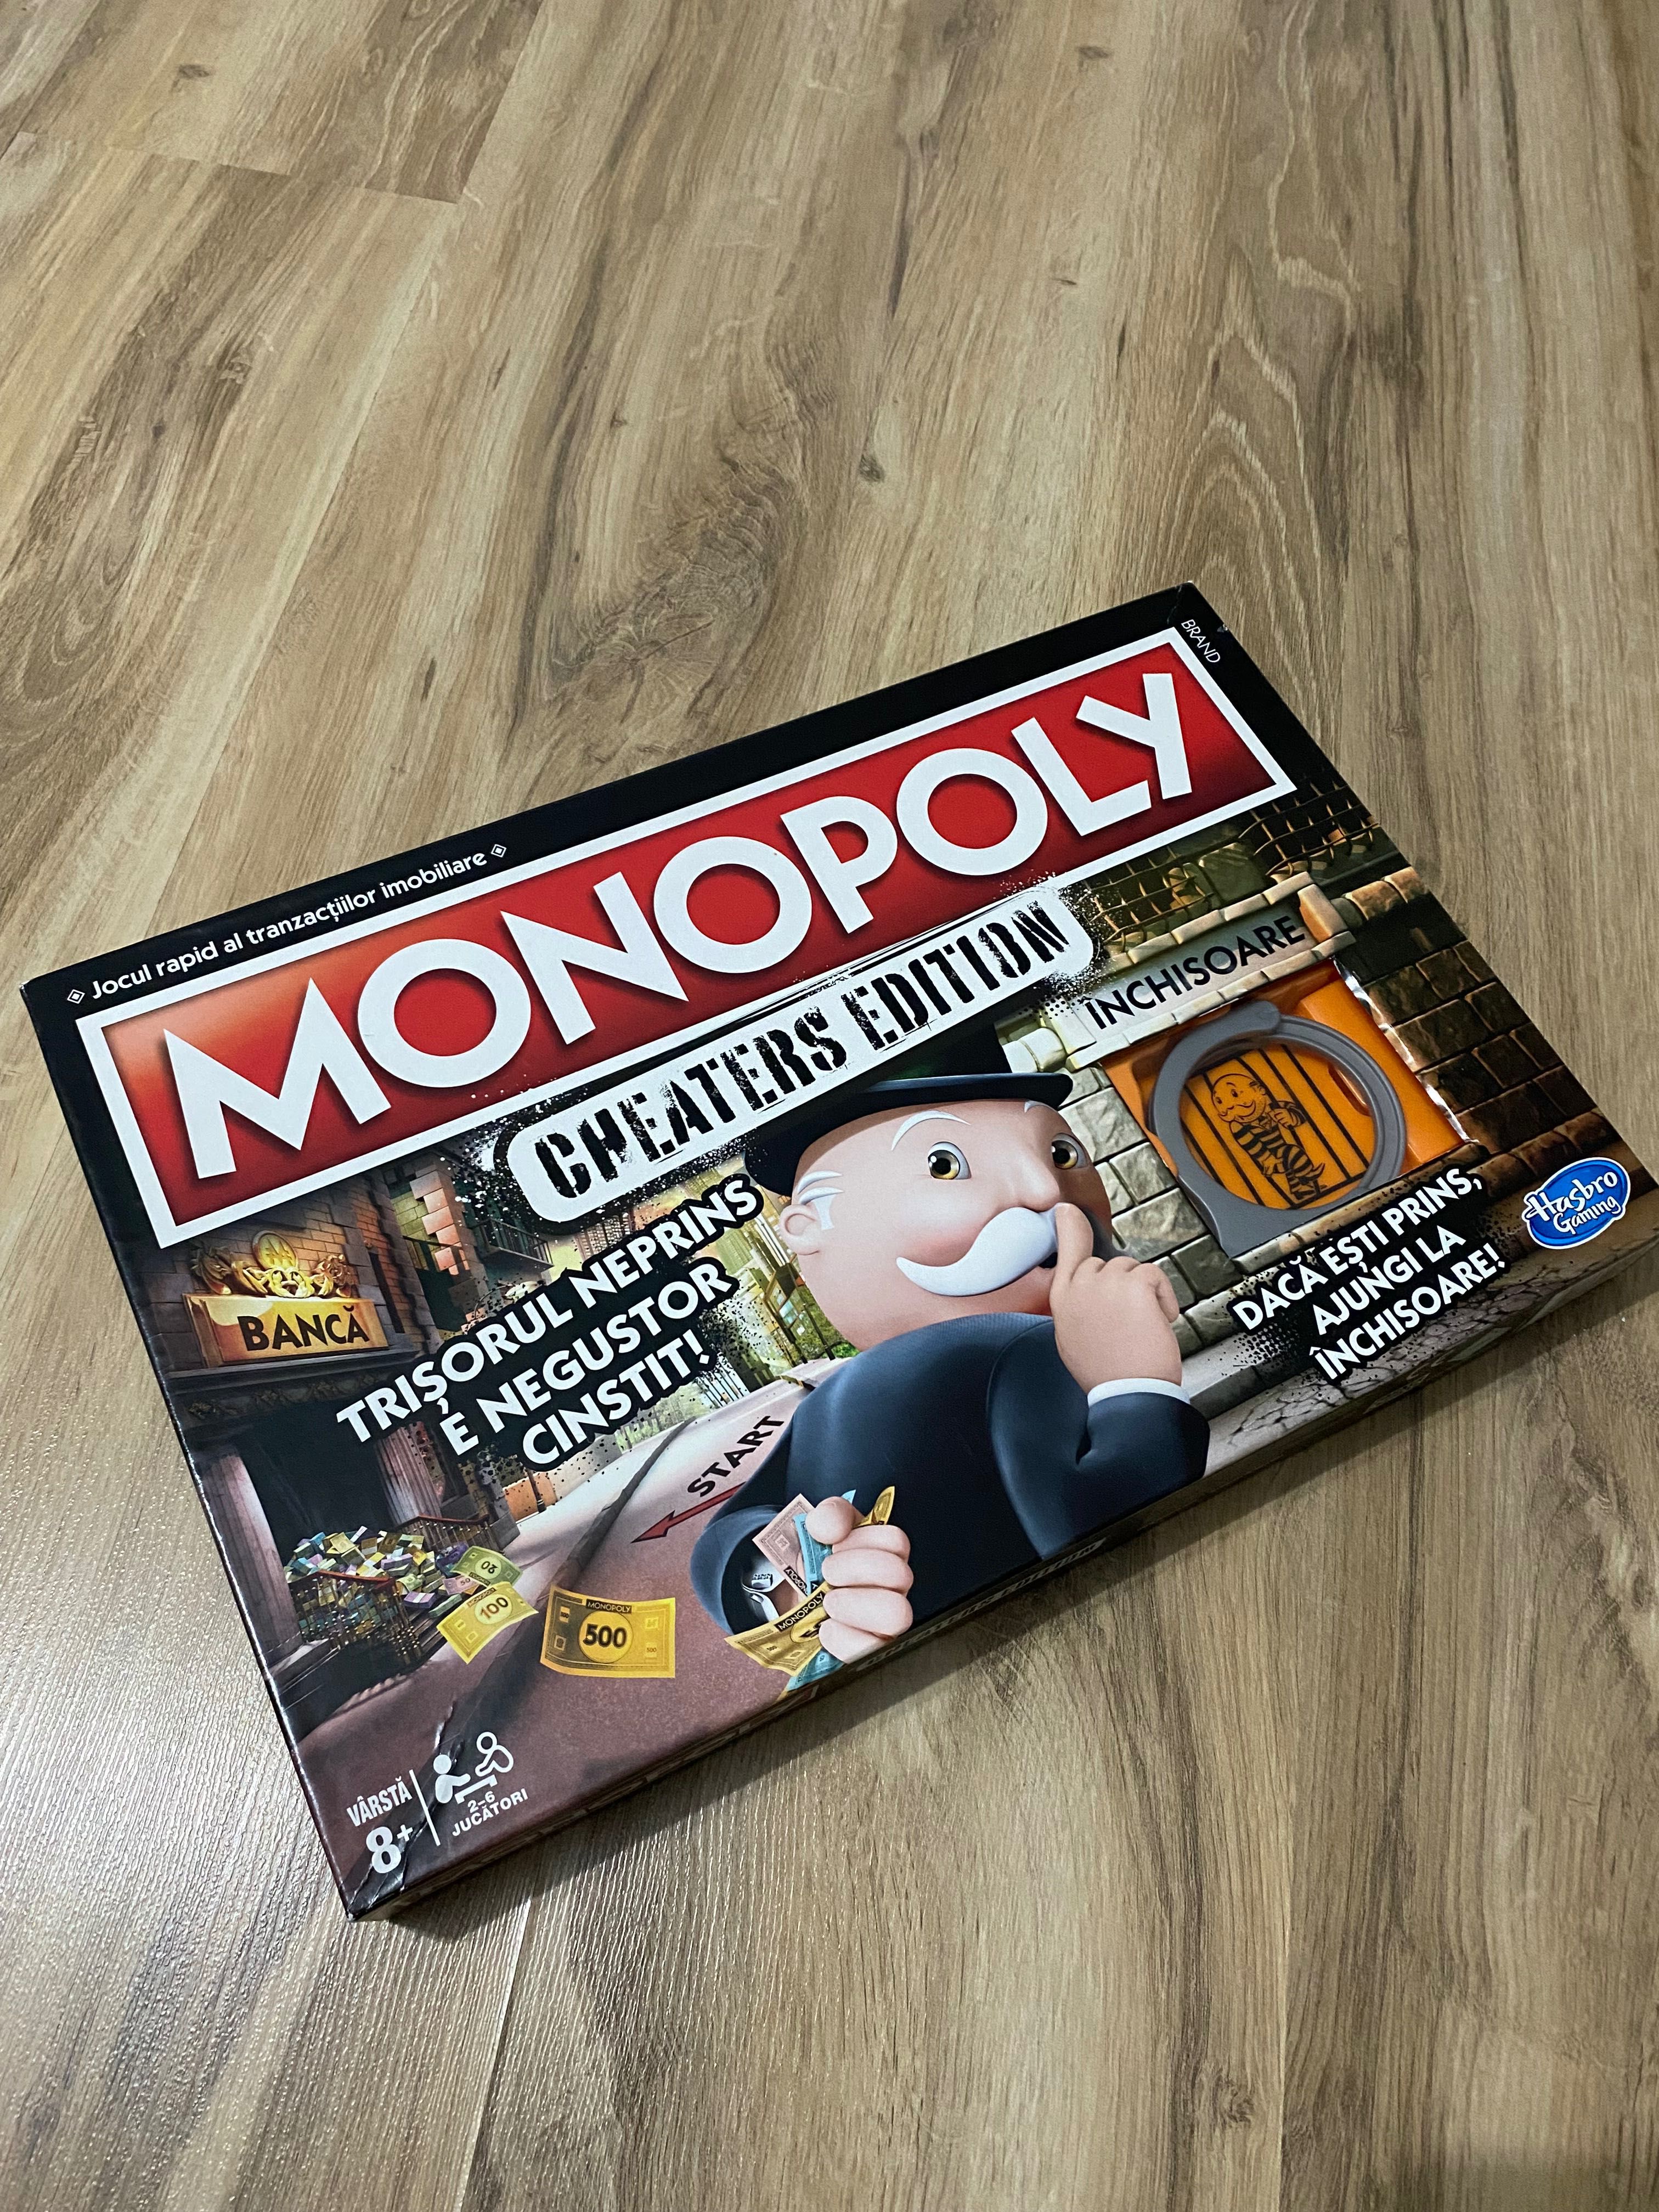 Monopoly cheaters edition- 50 RON